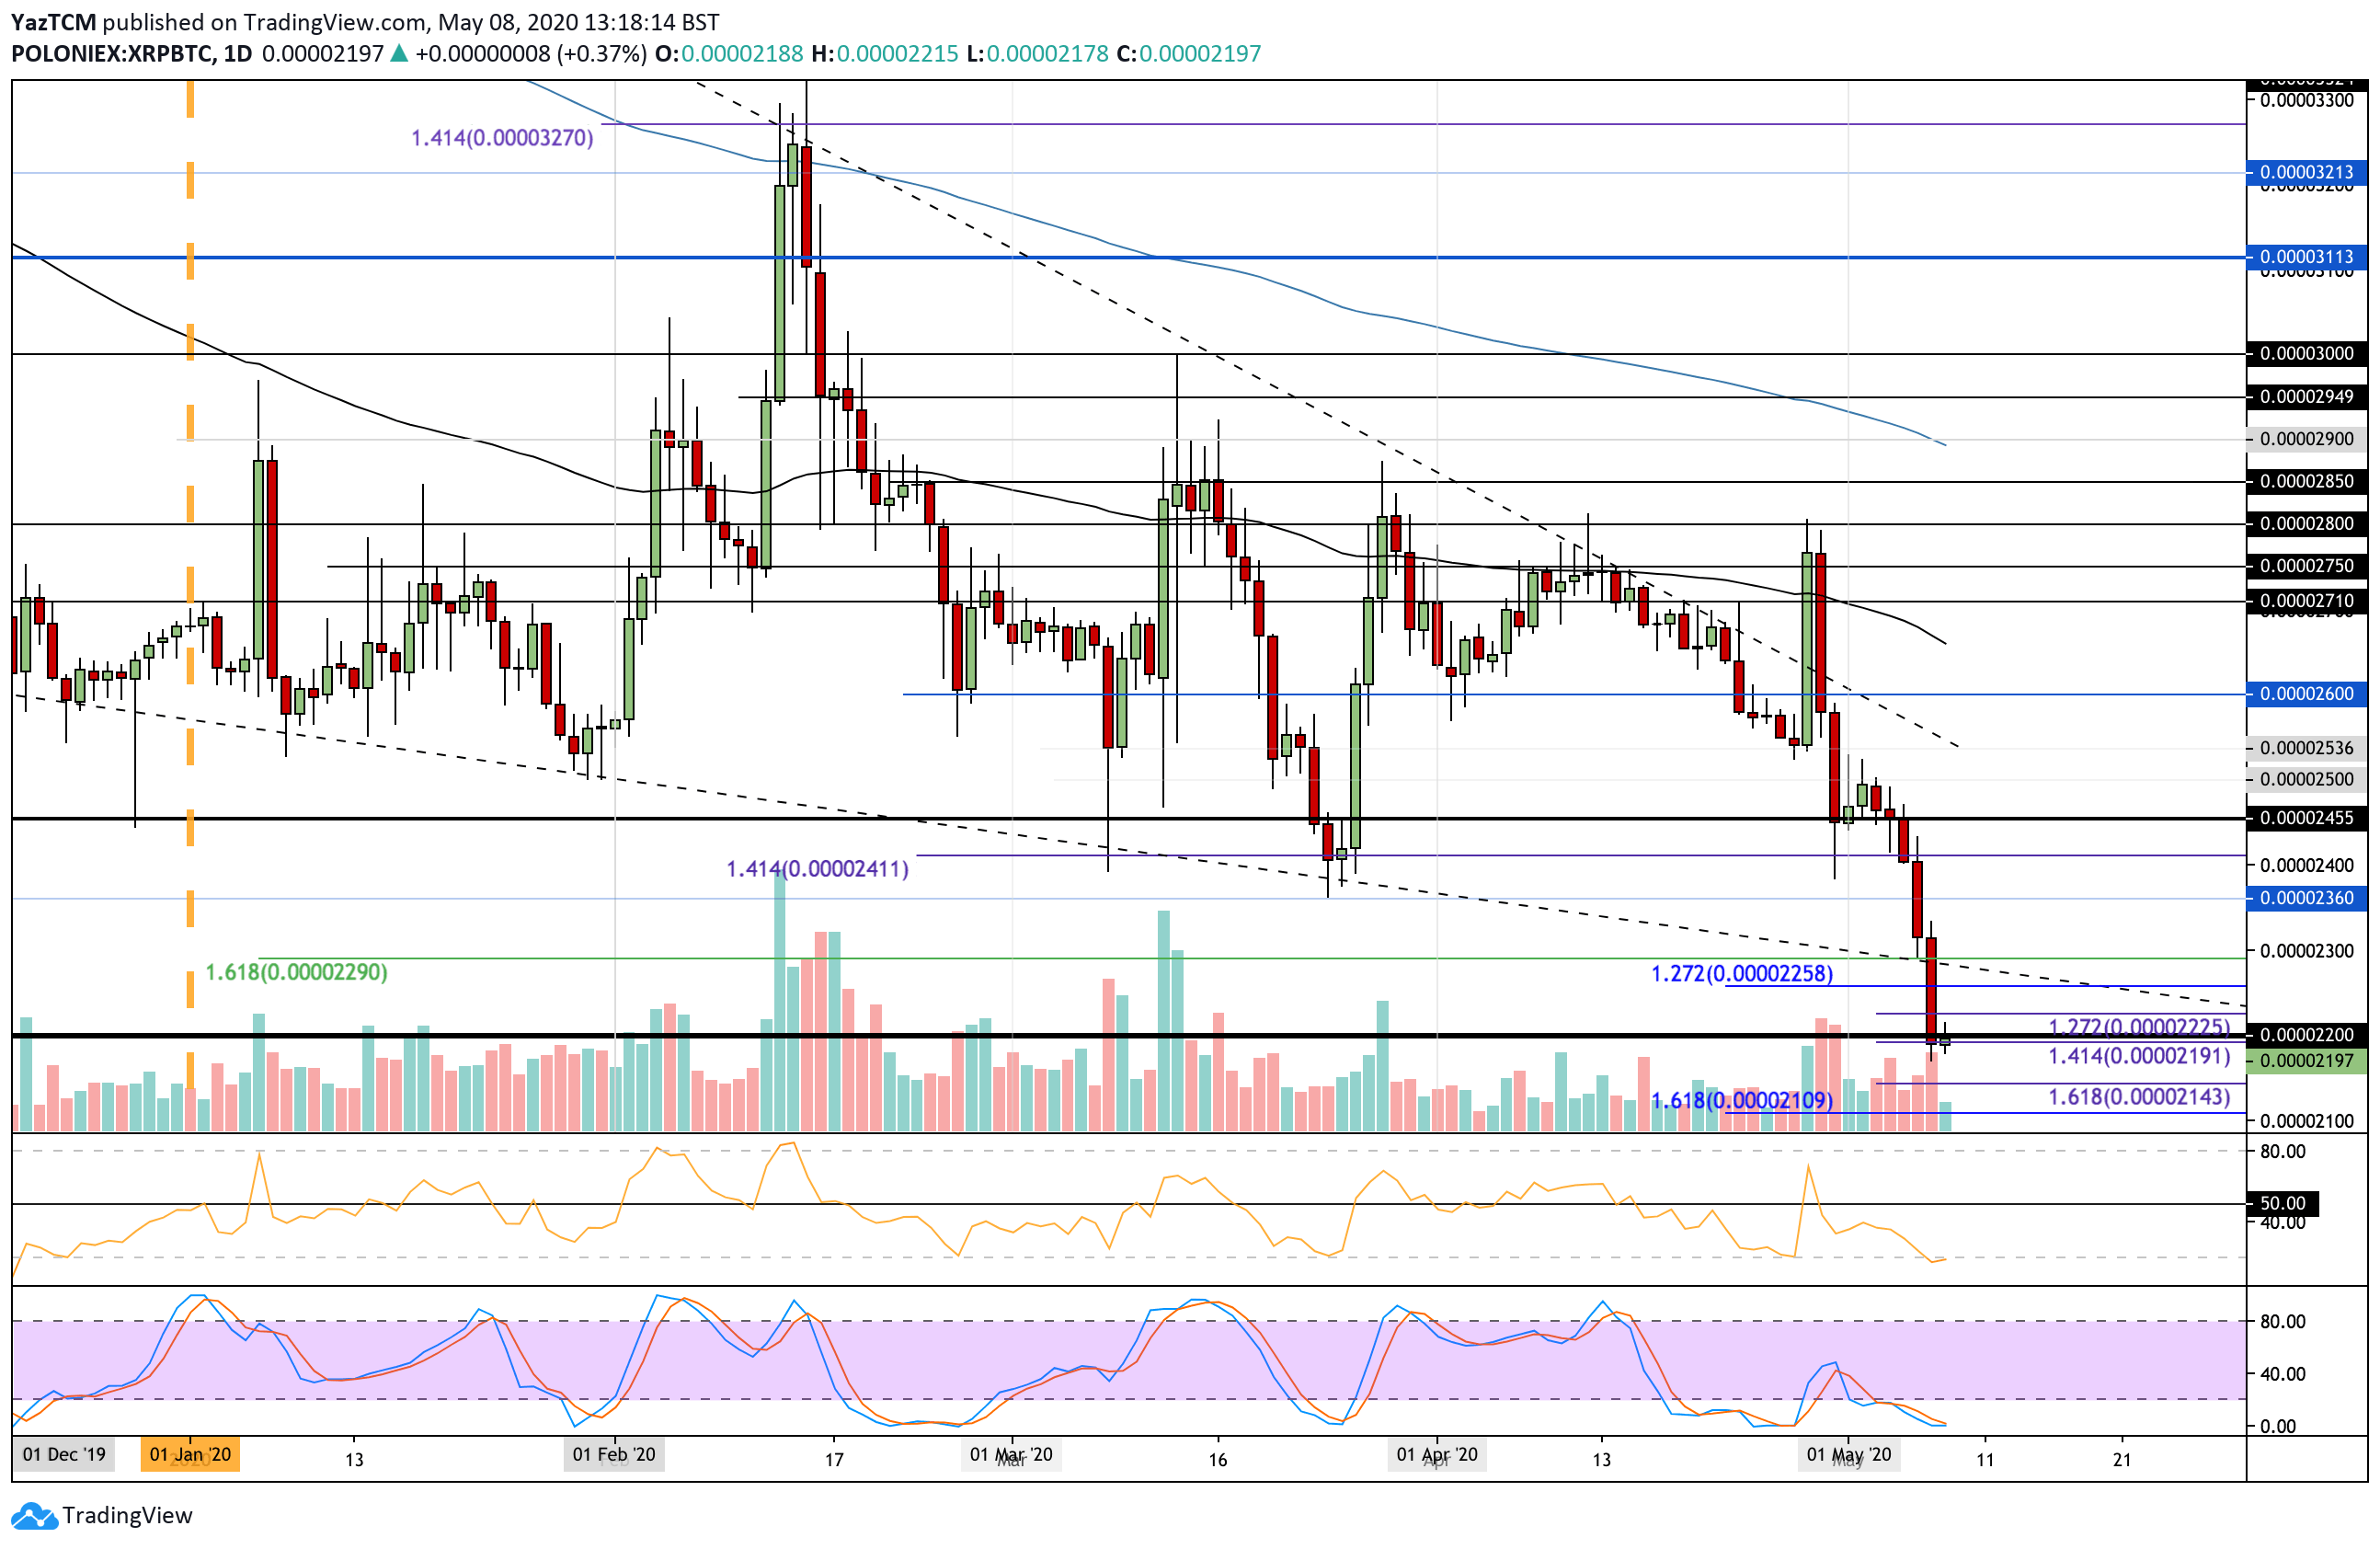 Crypto Price Analysis & Overview May 8th: Bitcoin, Ethereum, Ripple, Monero, and Tron